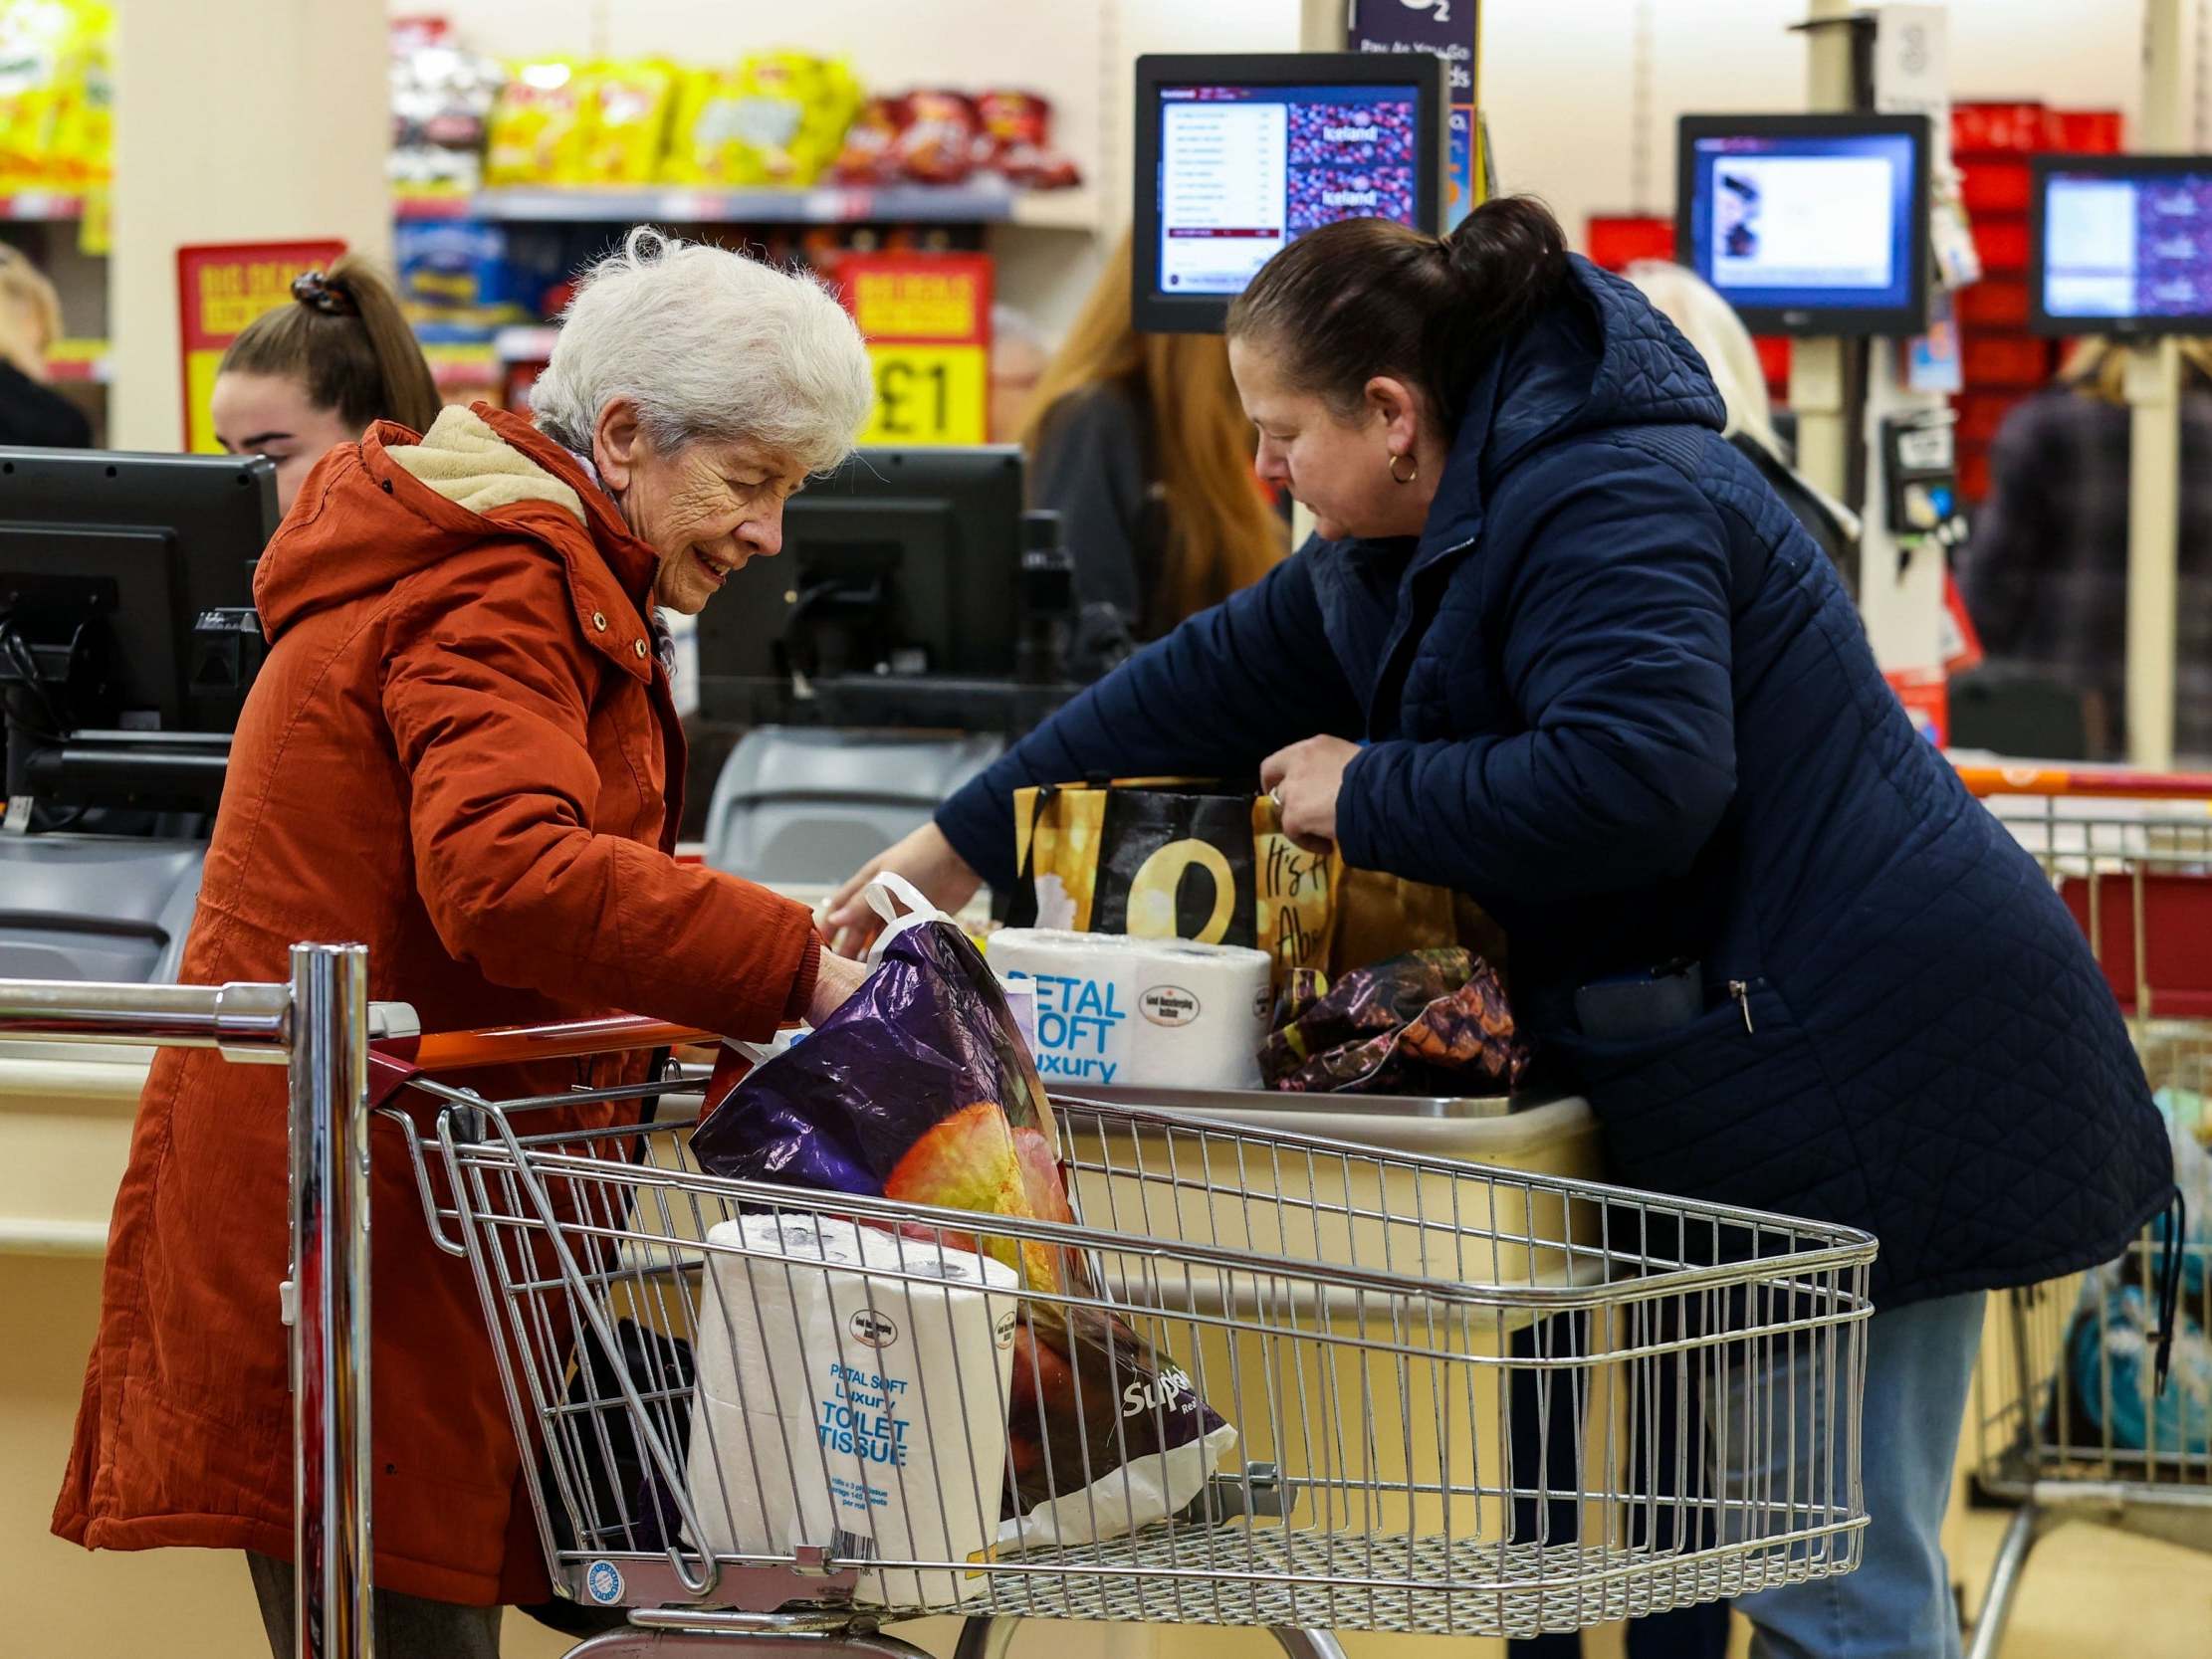 The crisis has brought the conduct of supermarkets to the fore